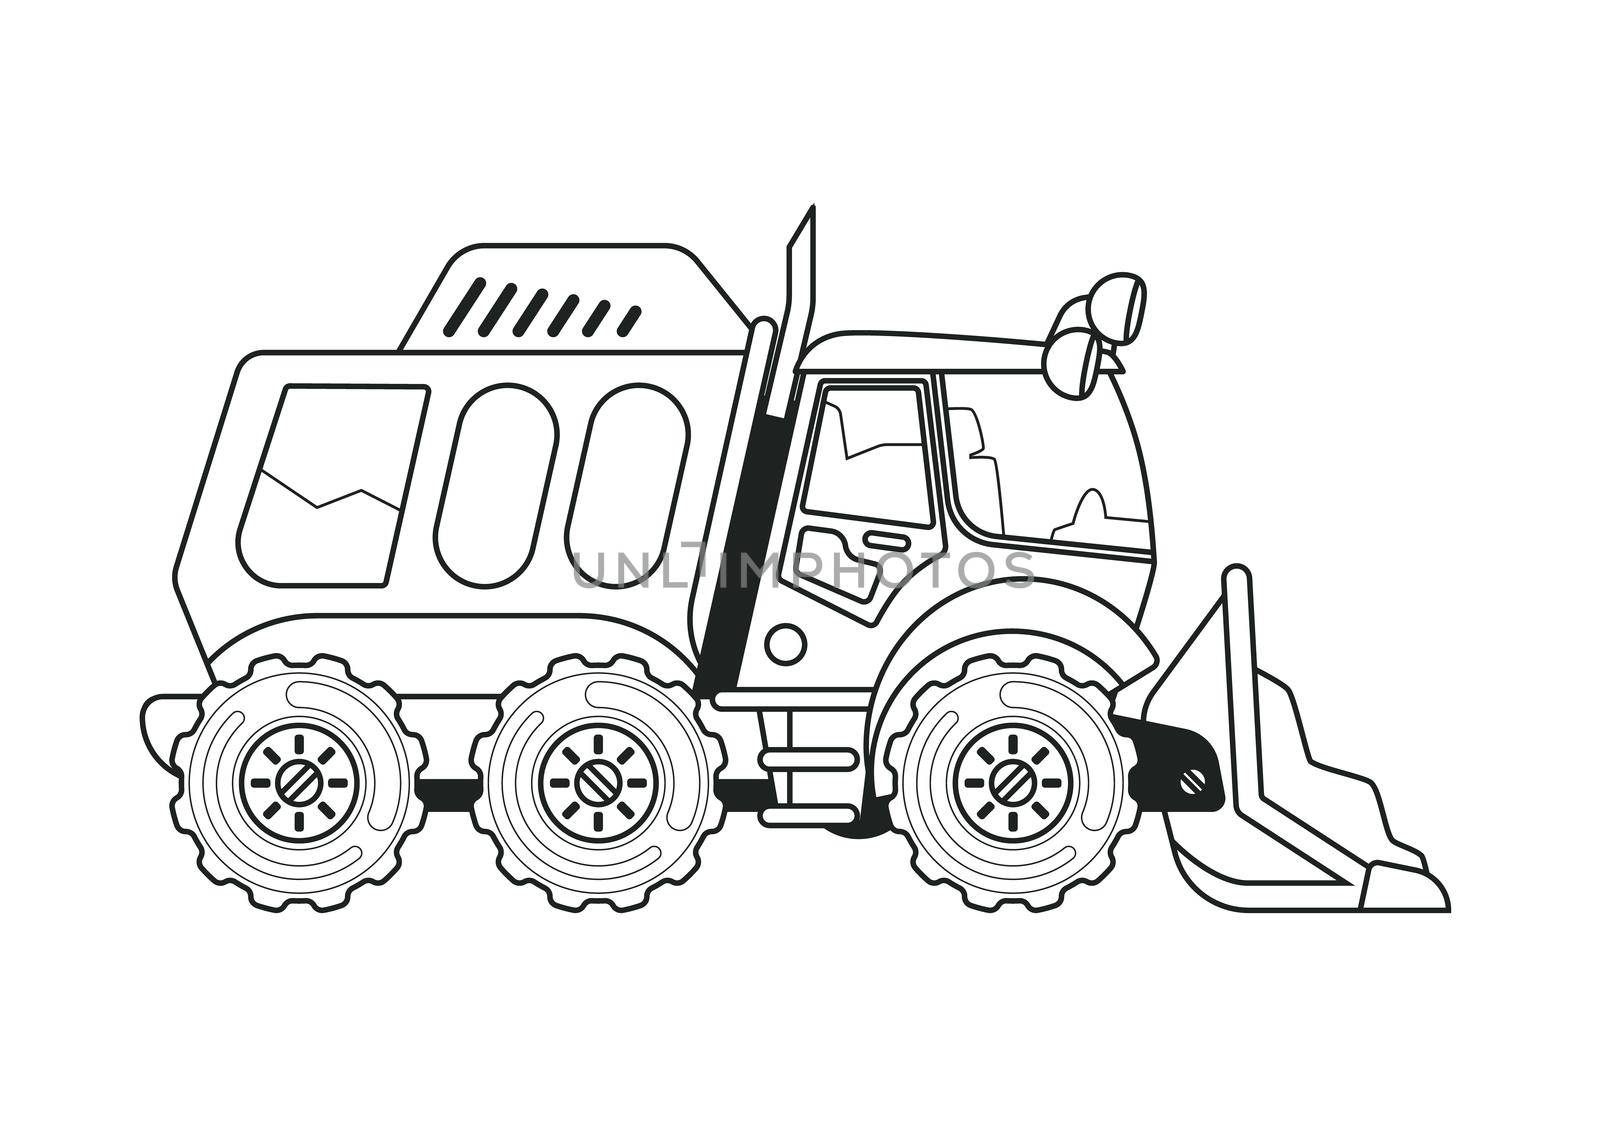 Cleaning Truck Coloring Book by vmalafeevskiy